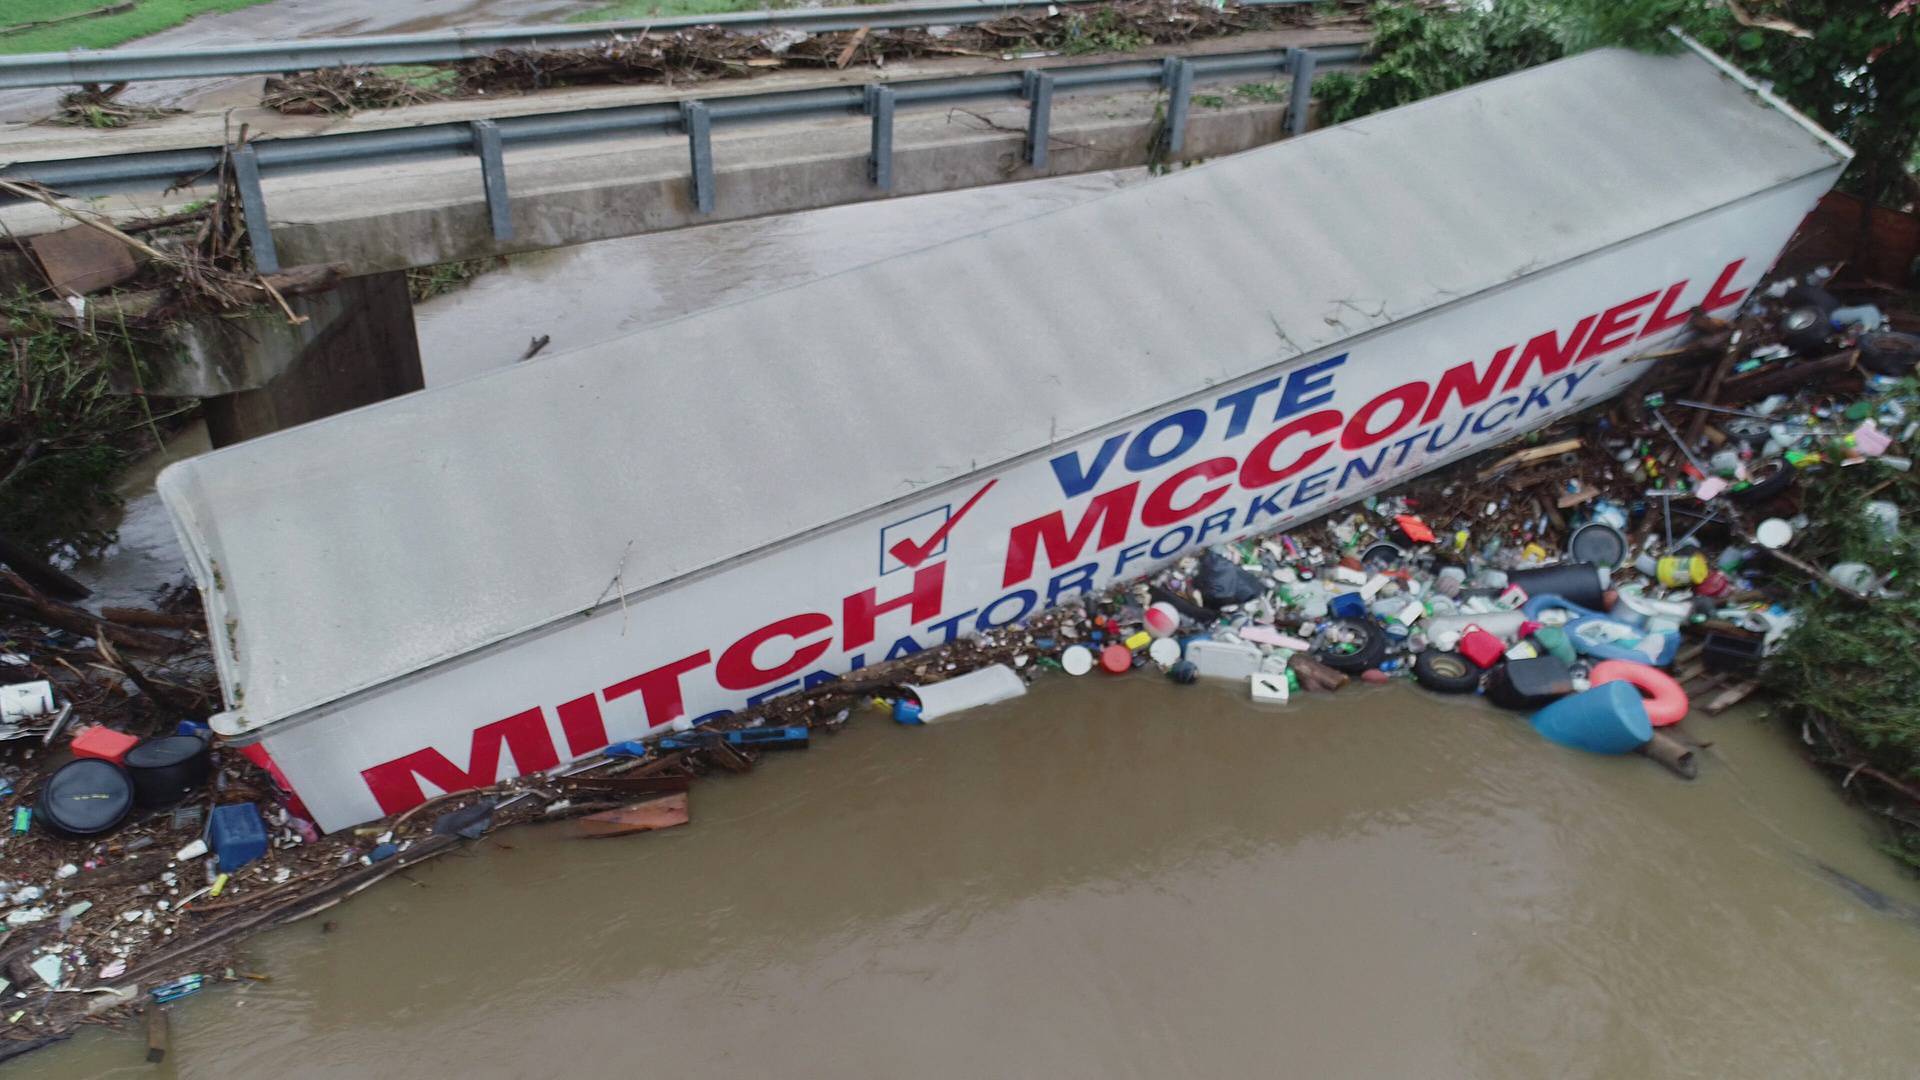 A trailer promoting U.S. Senate Republican leader Mitch McConnell lies in a waterway due to flooding in eastern Kentucky